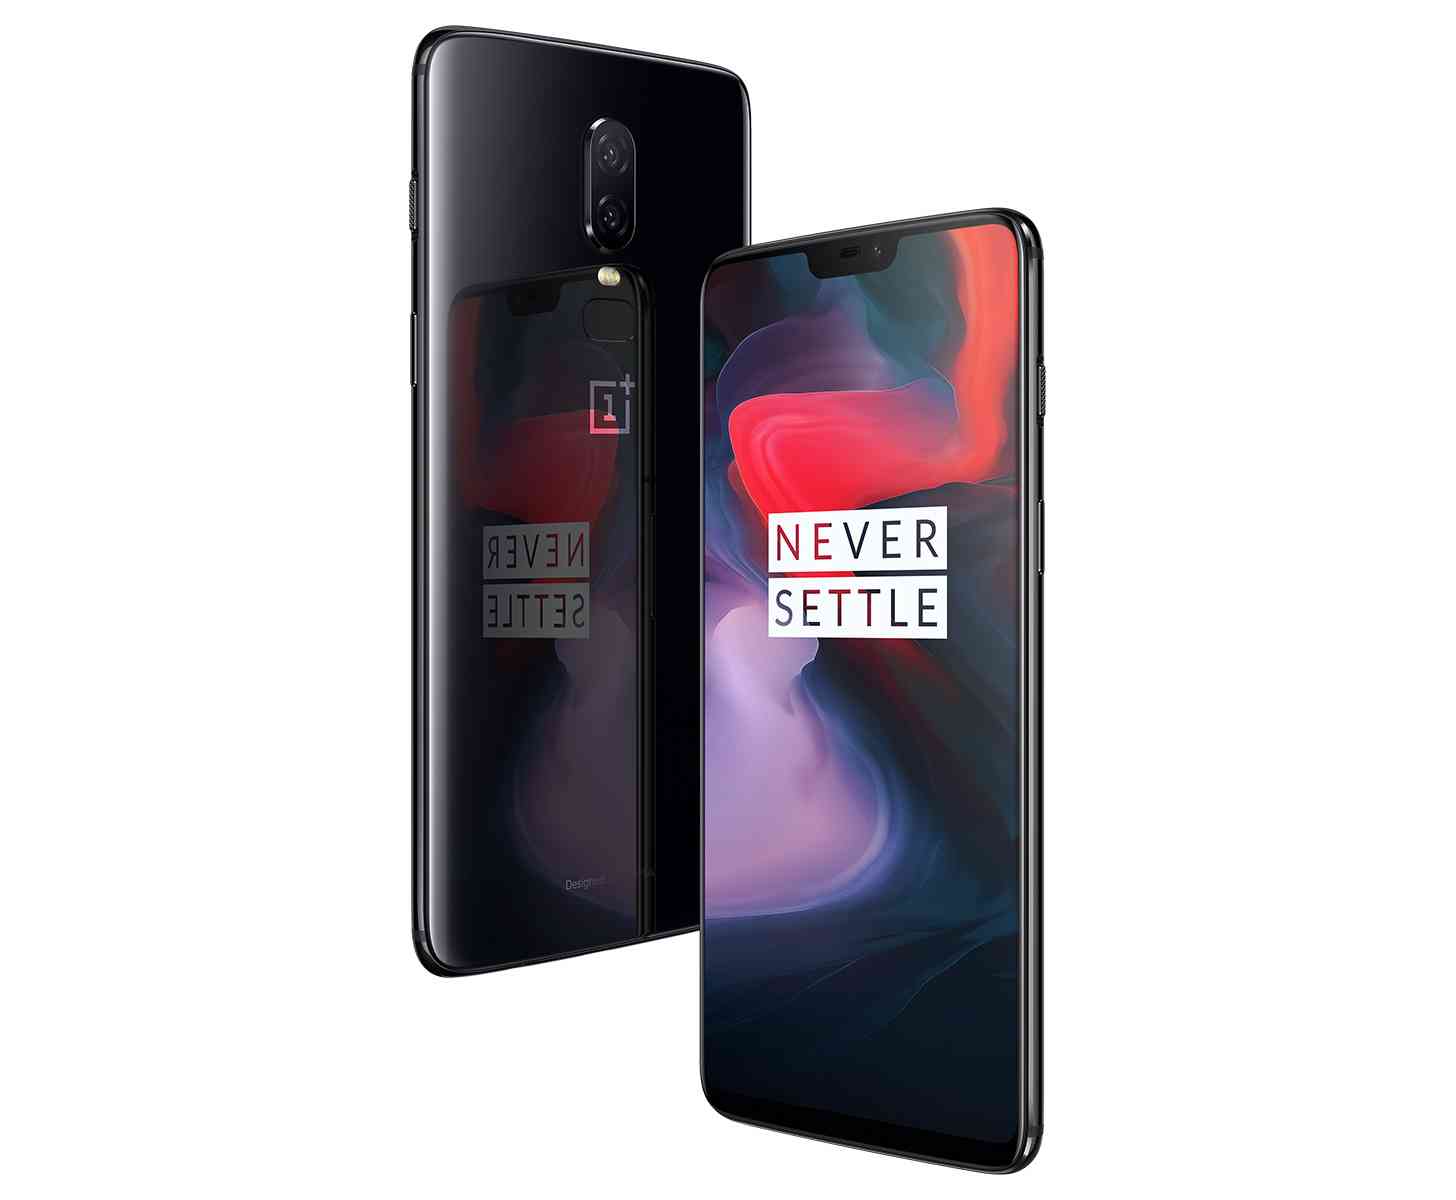 OnePlus 6 Mirror Black official